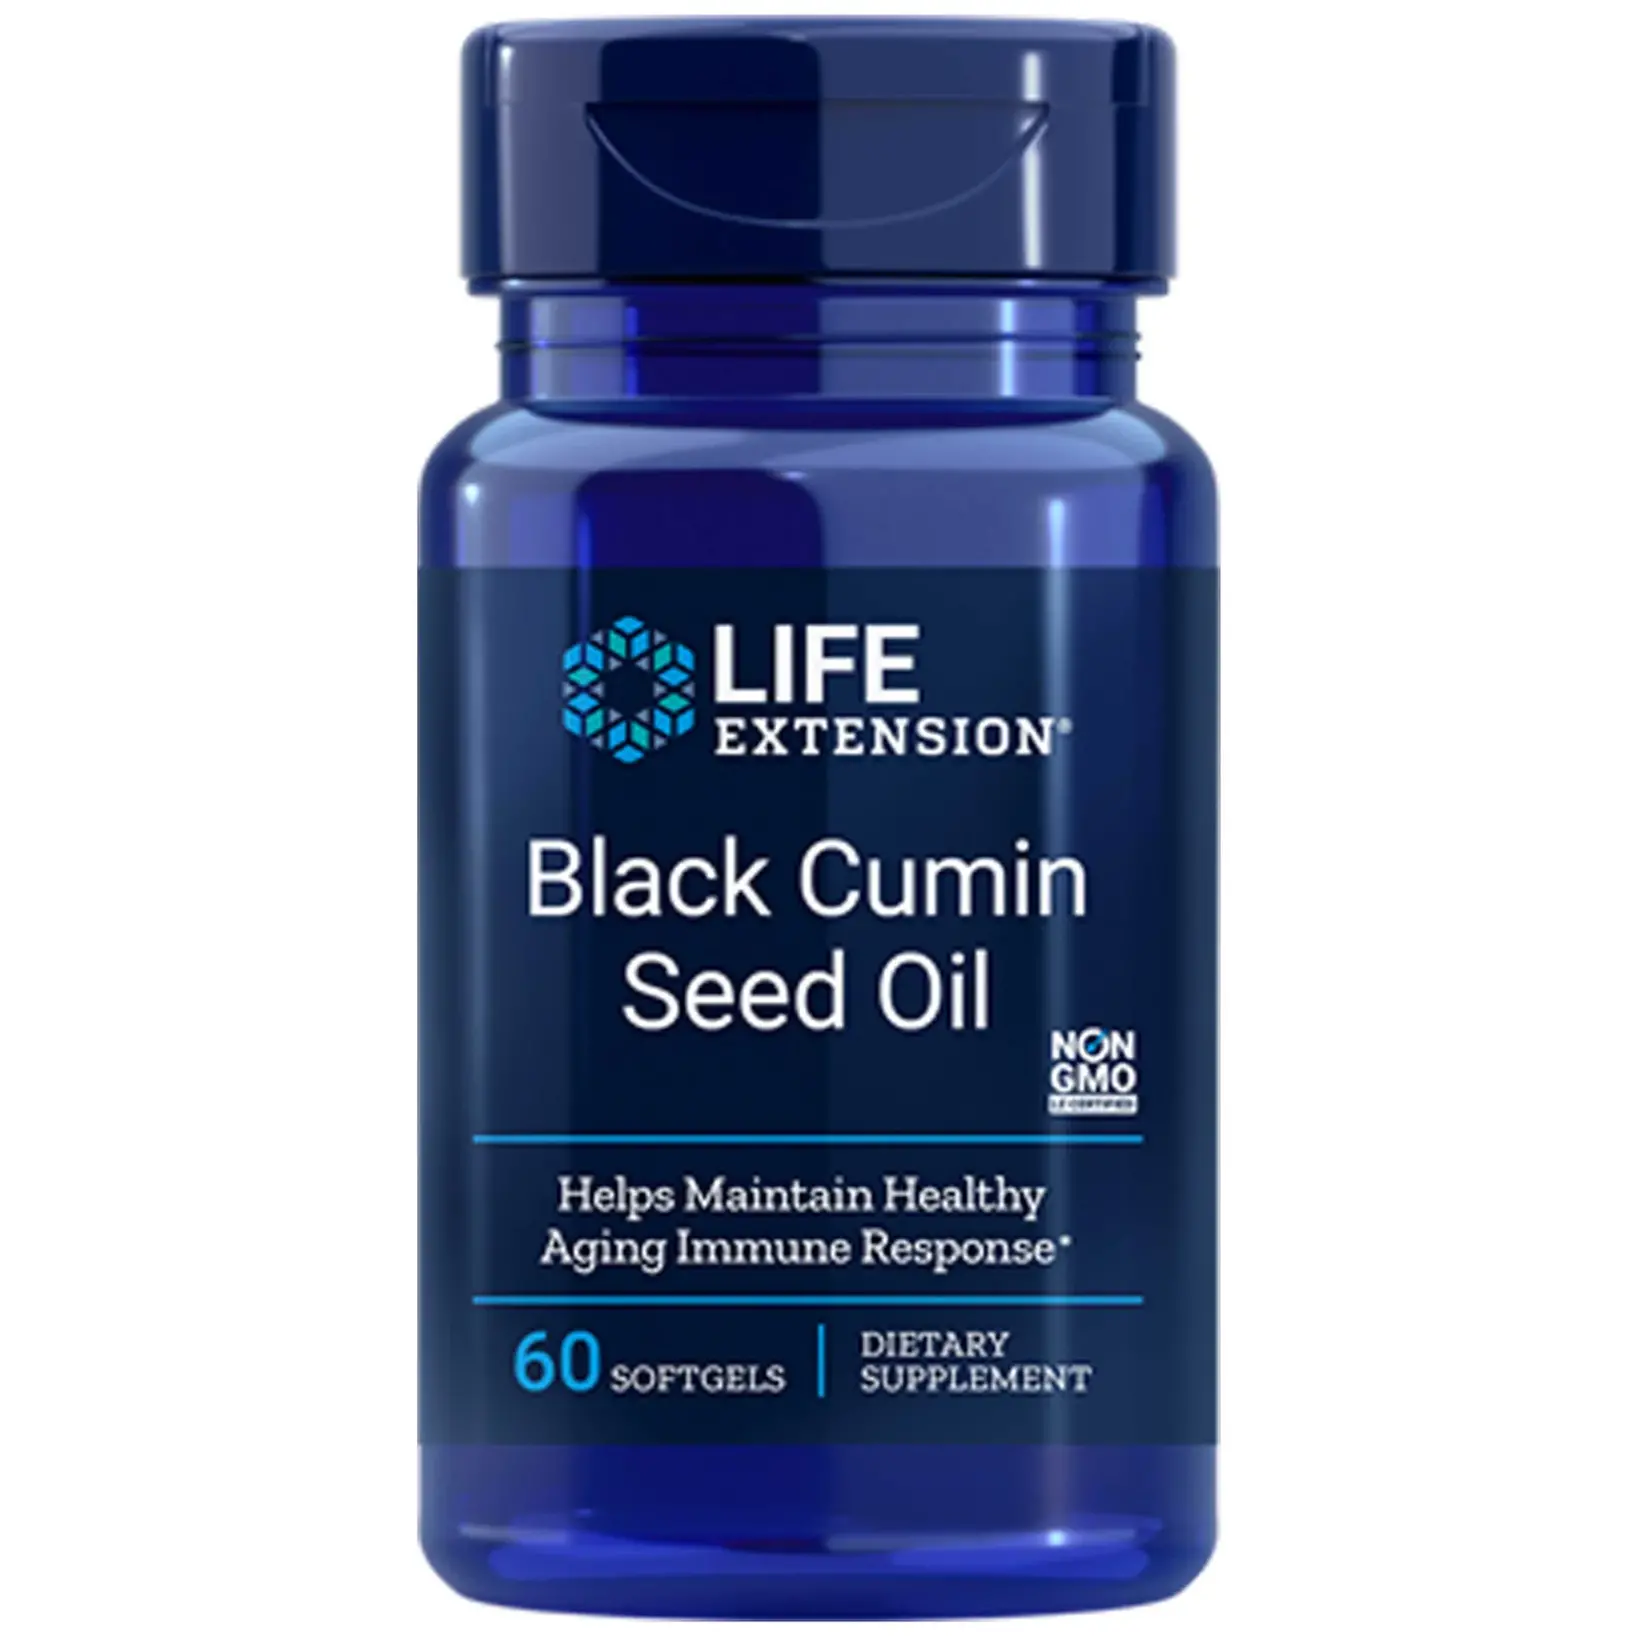 Life Extension Black Cumin Seed Oil (Life Extension)